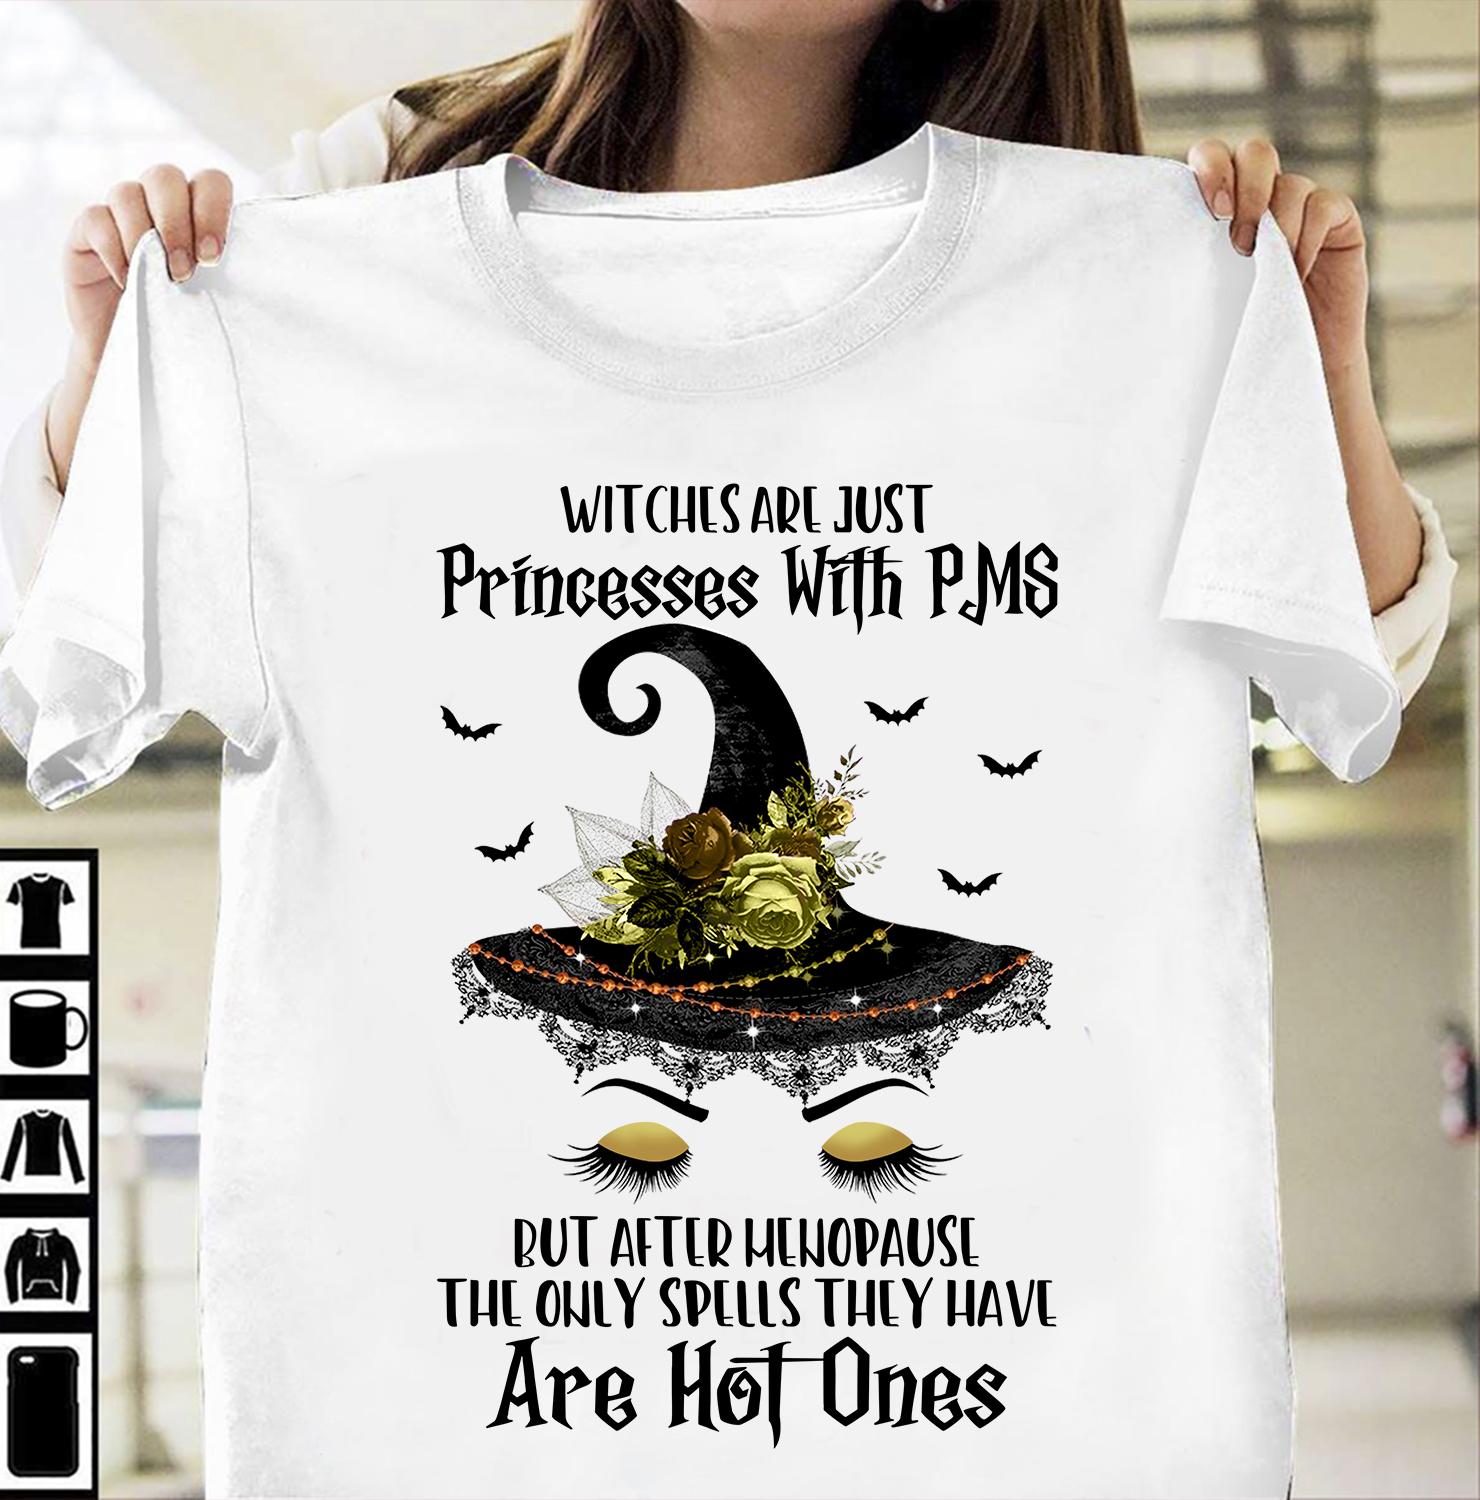 Witch Face, Halloween Witch Gift - Witches just princesses with PMS but after menopause the only spells they have are not ones